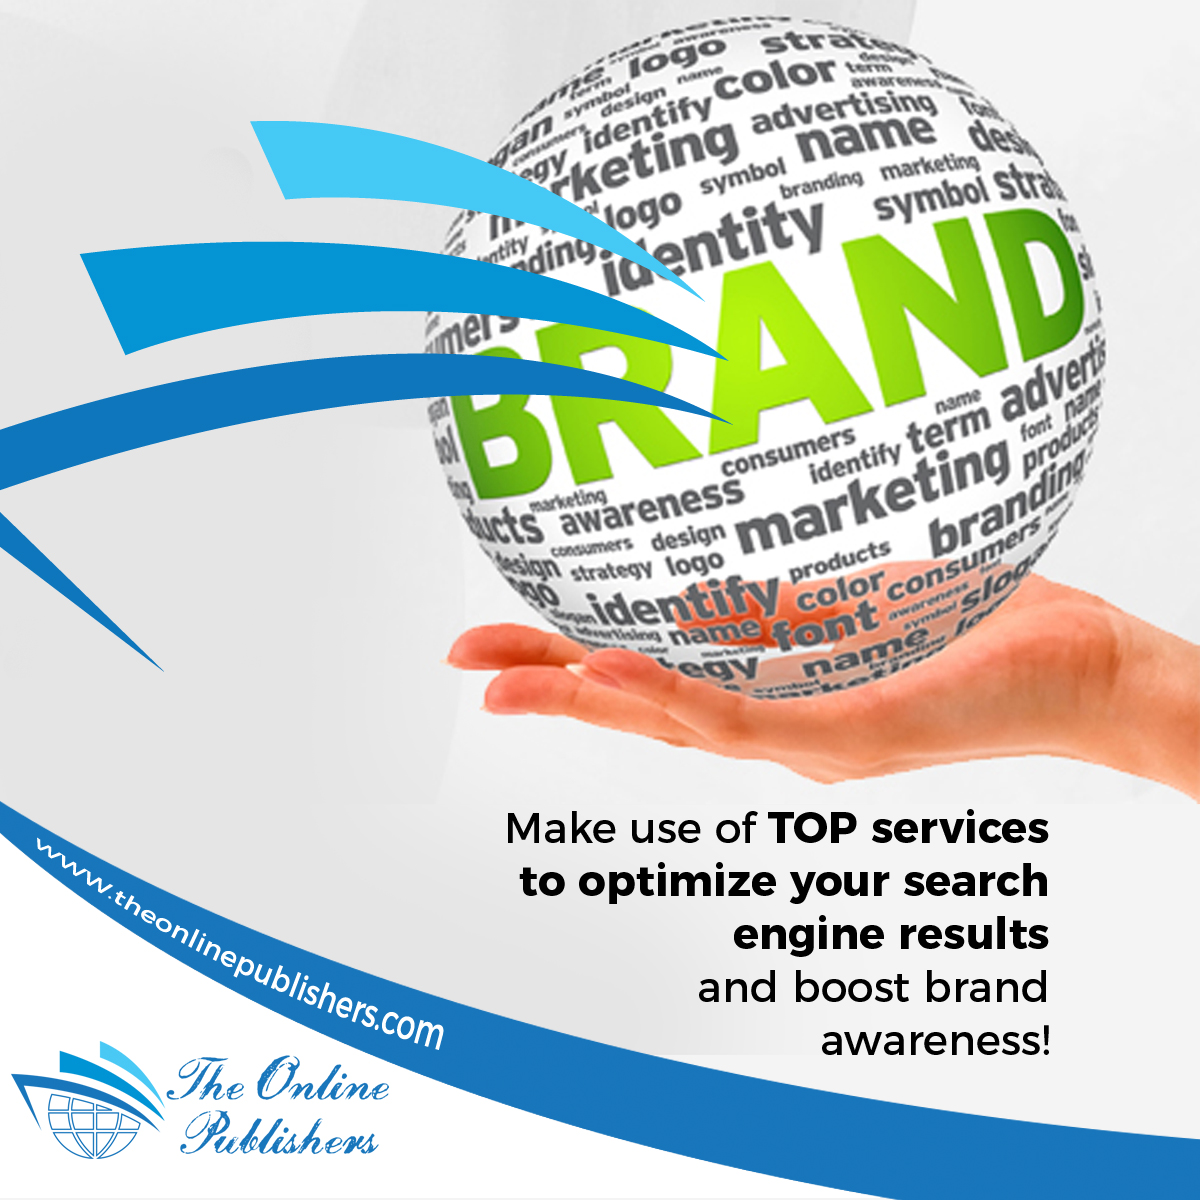 Why do you need the services of a top digital marketing agency?